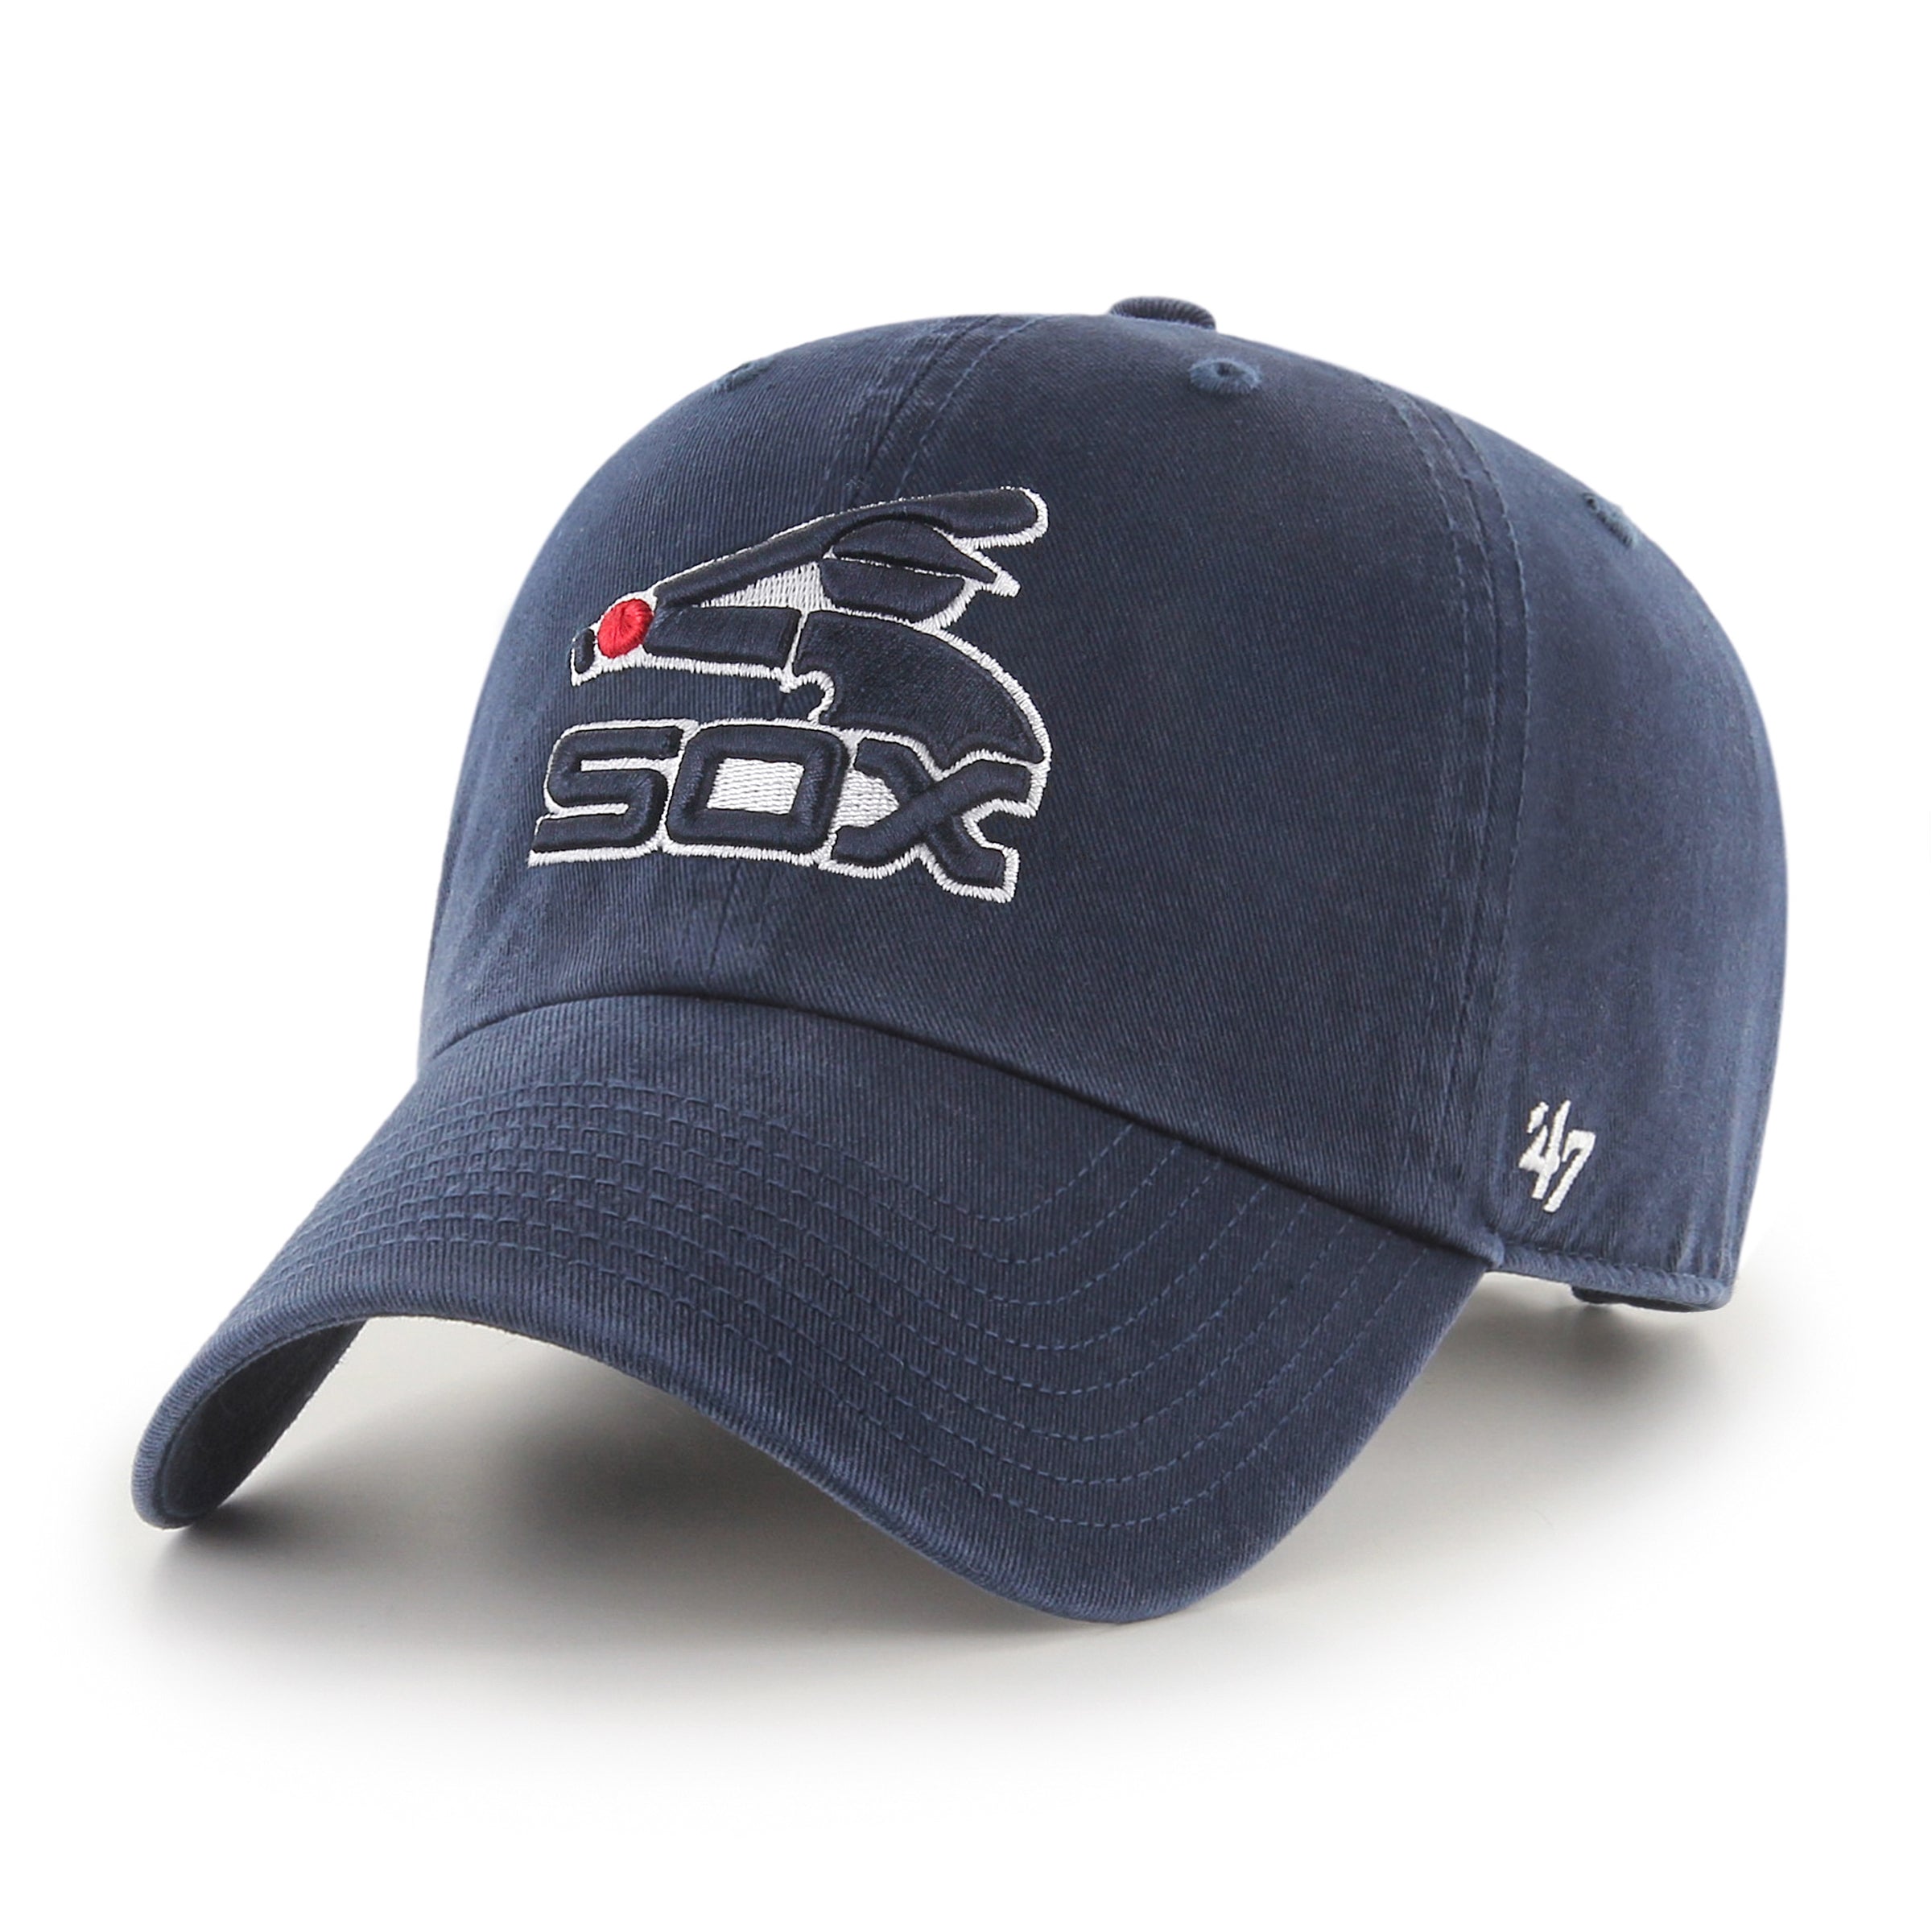 Milwaukee Braves '47 Brand Cooperstown Collection Basic Logo Cleanup Adjustable Hat - Navy Blue